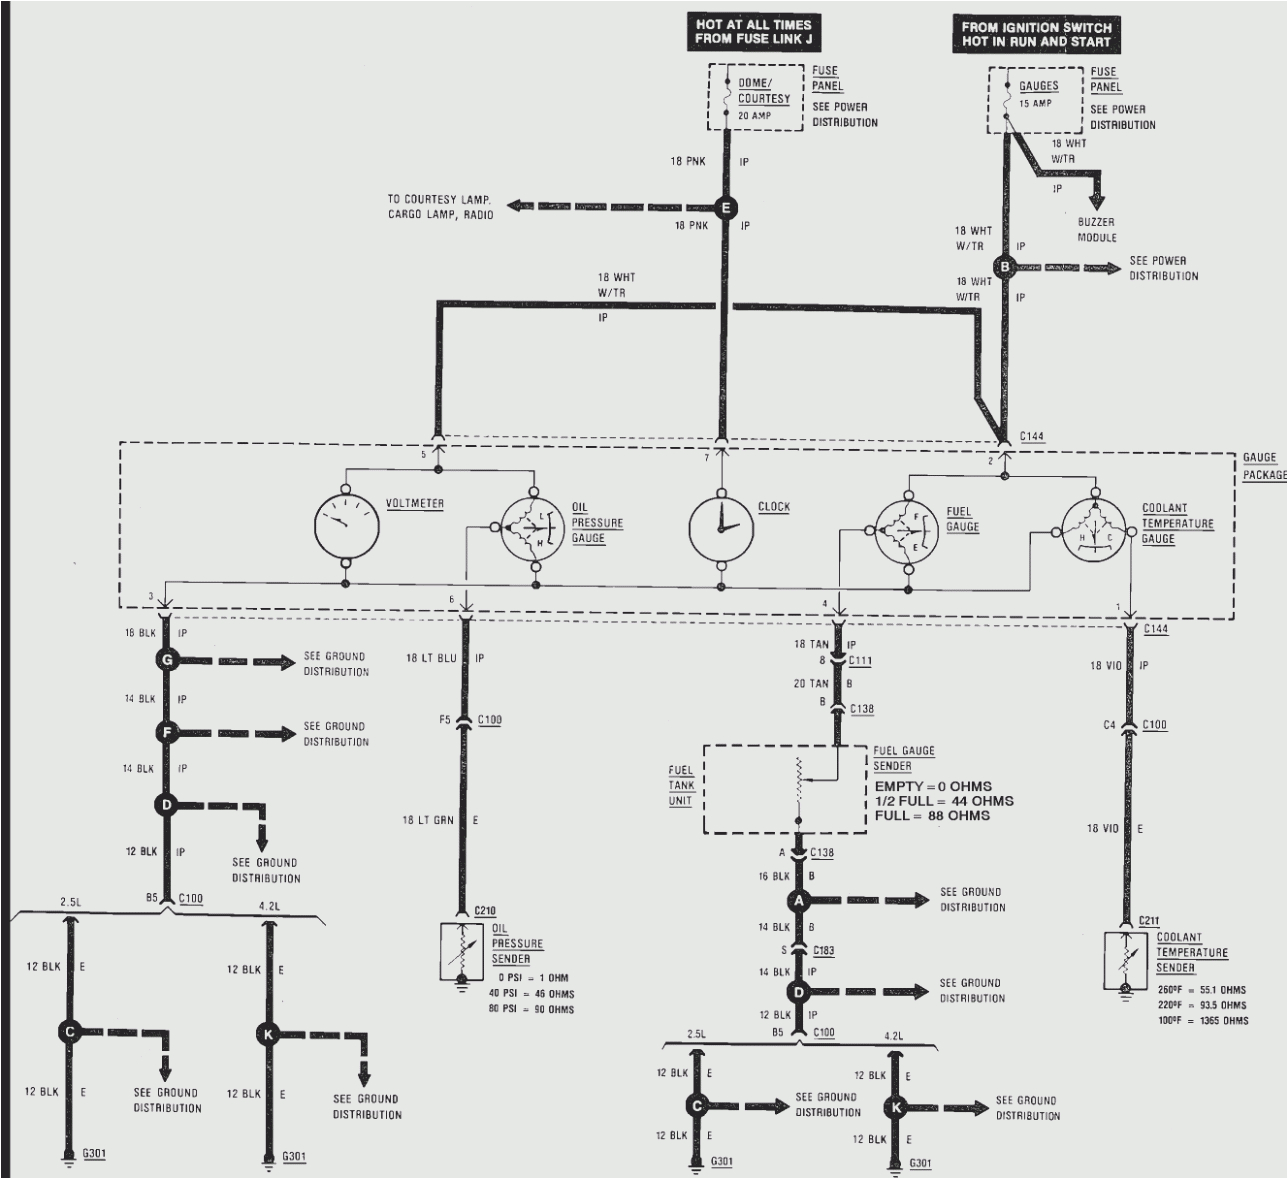 fuel guage non functional i need a wire diagram of system and fuel gauge wiring diagram gif